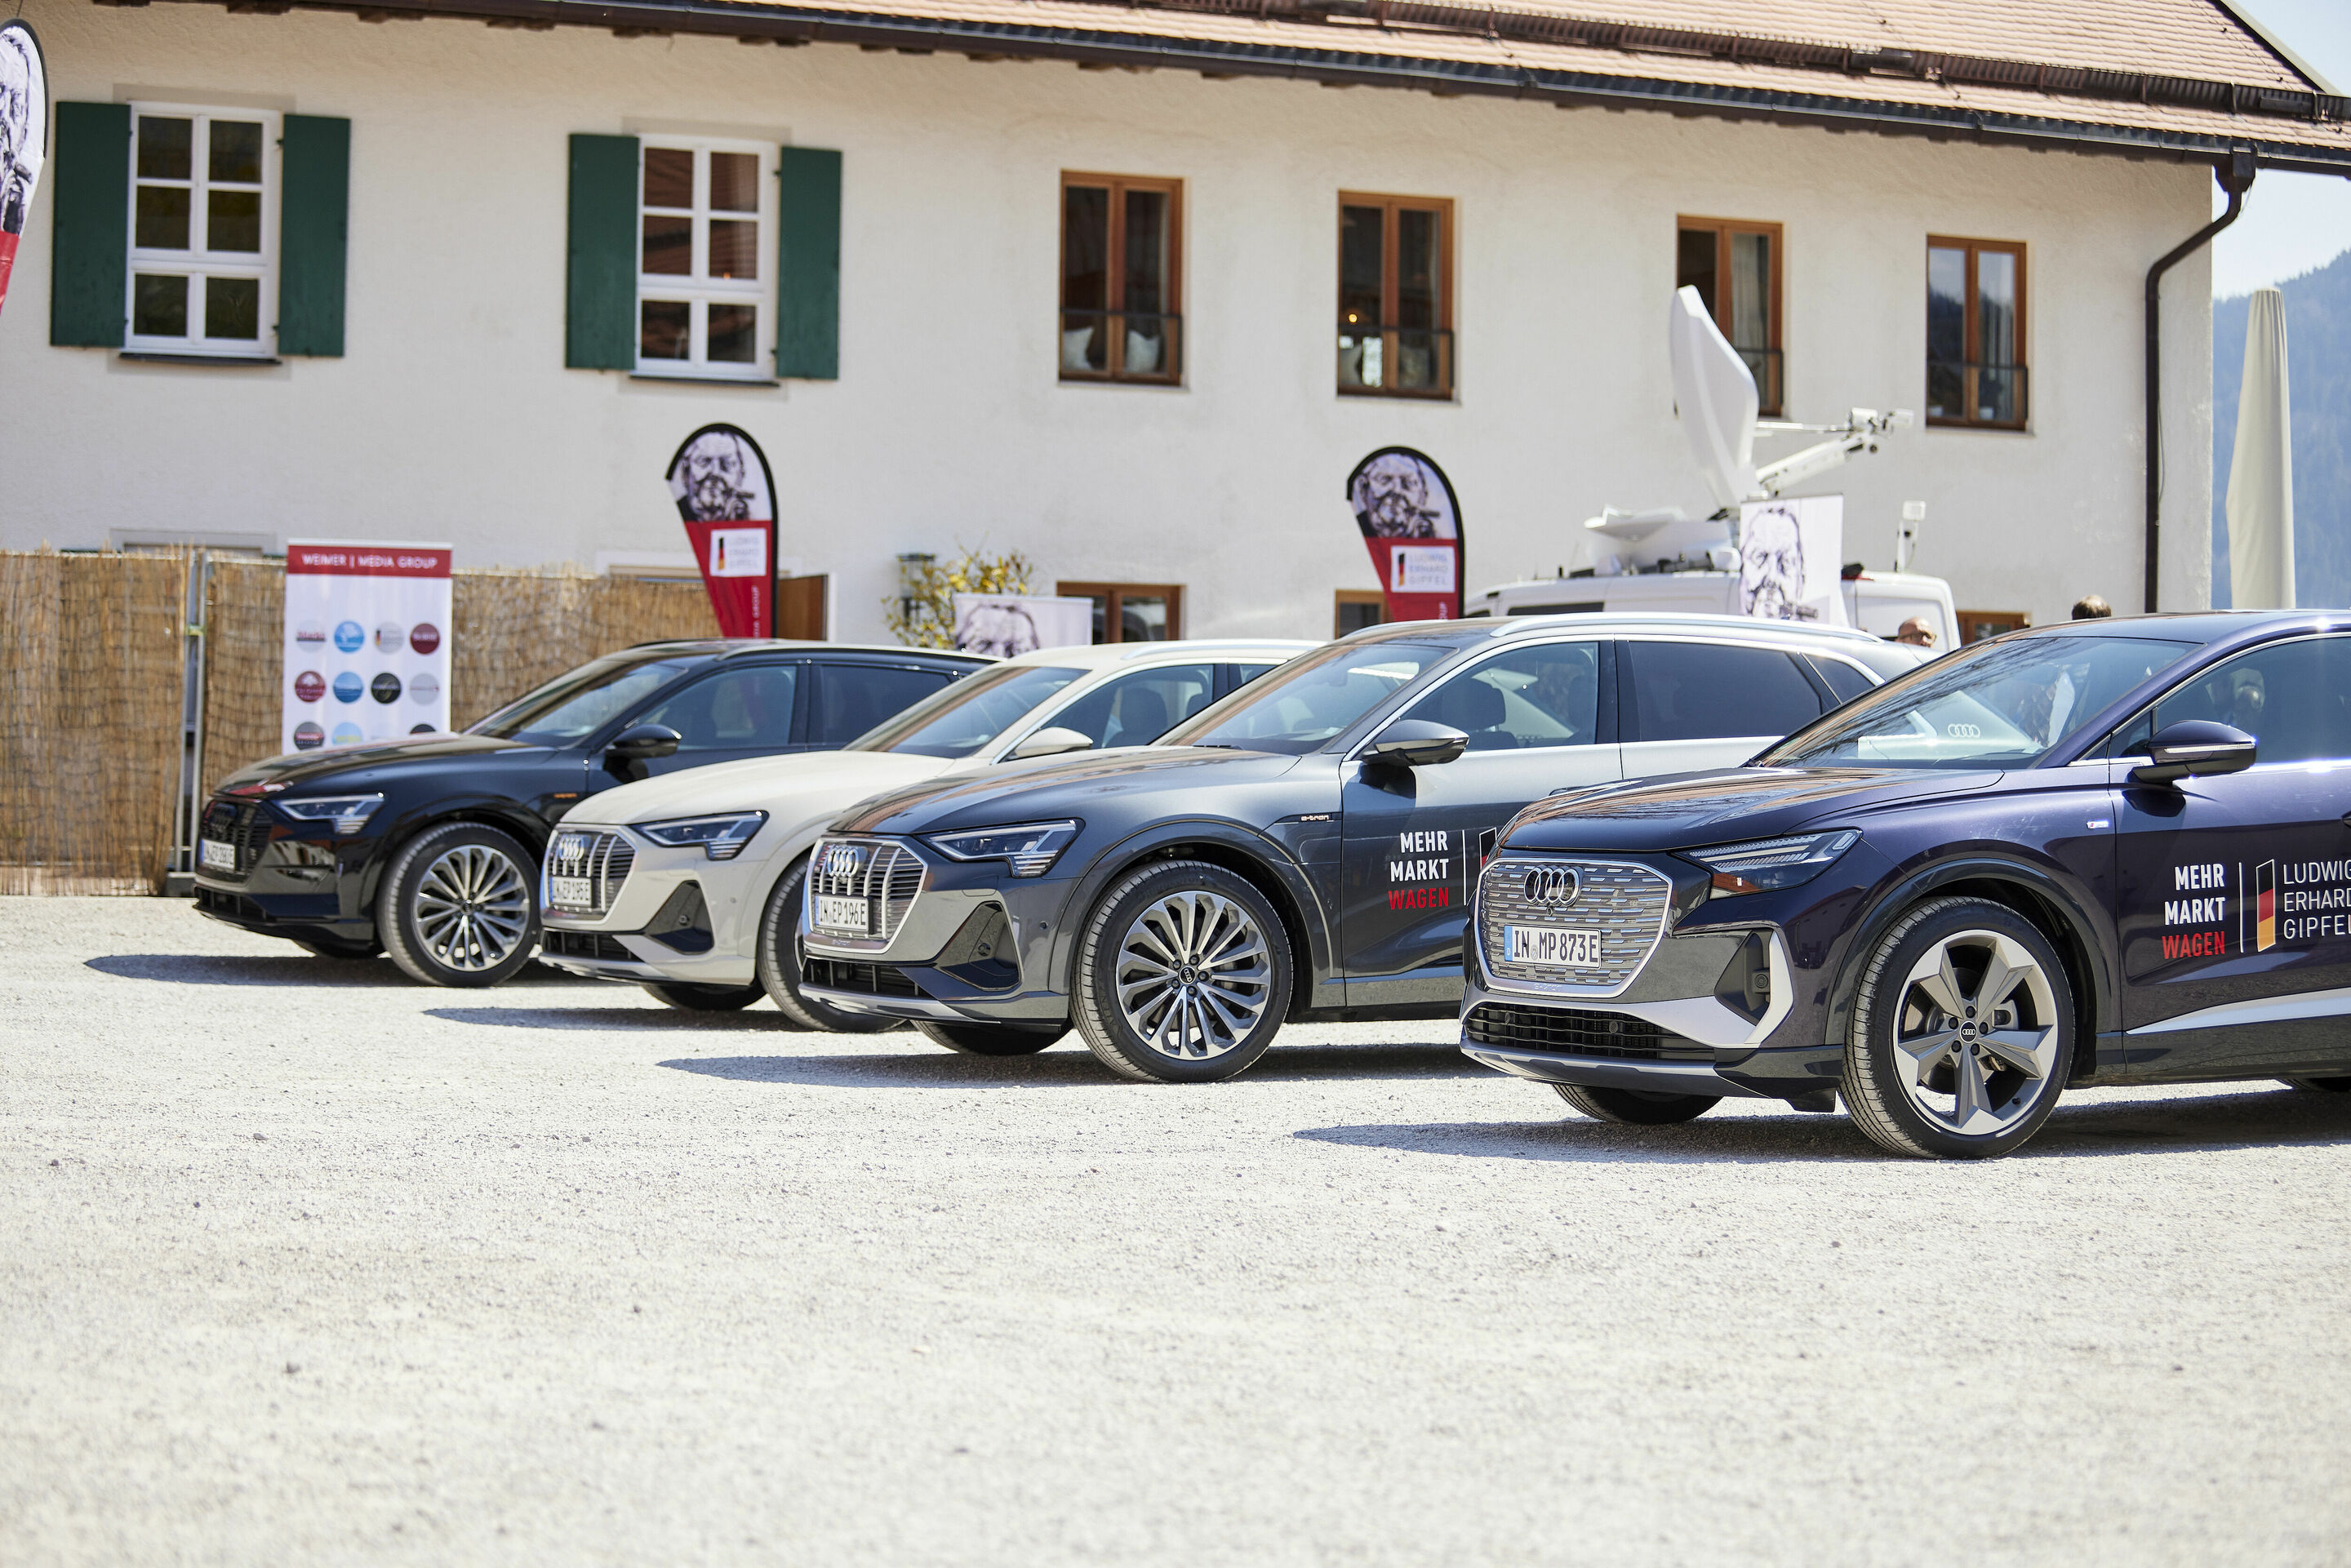 Audi has been a partner of the Ludwig Erhard Summit for many years